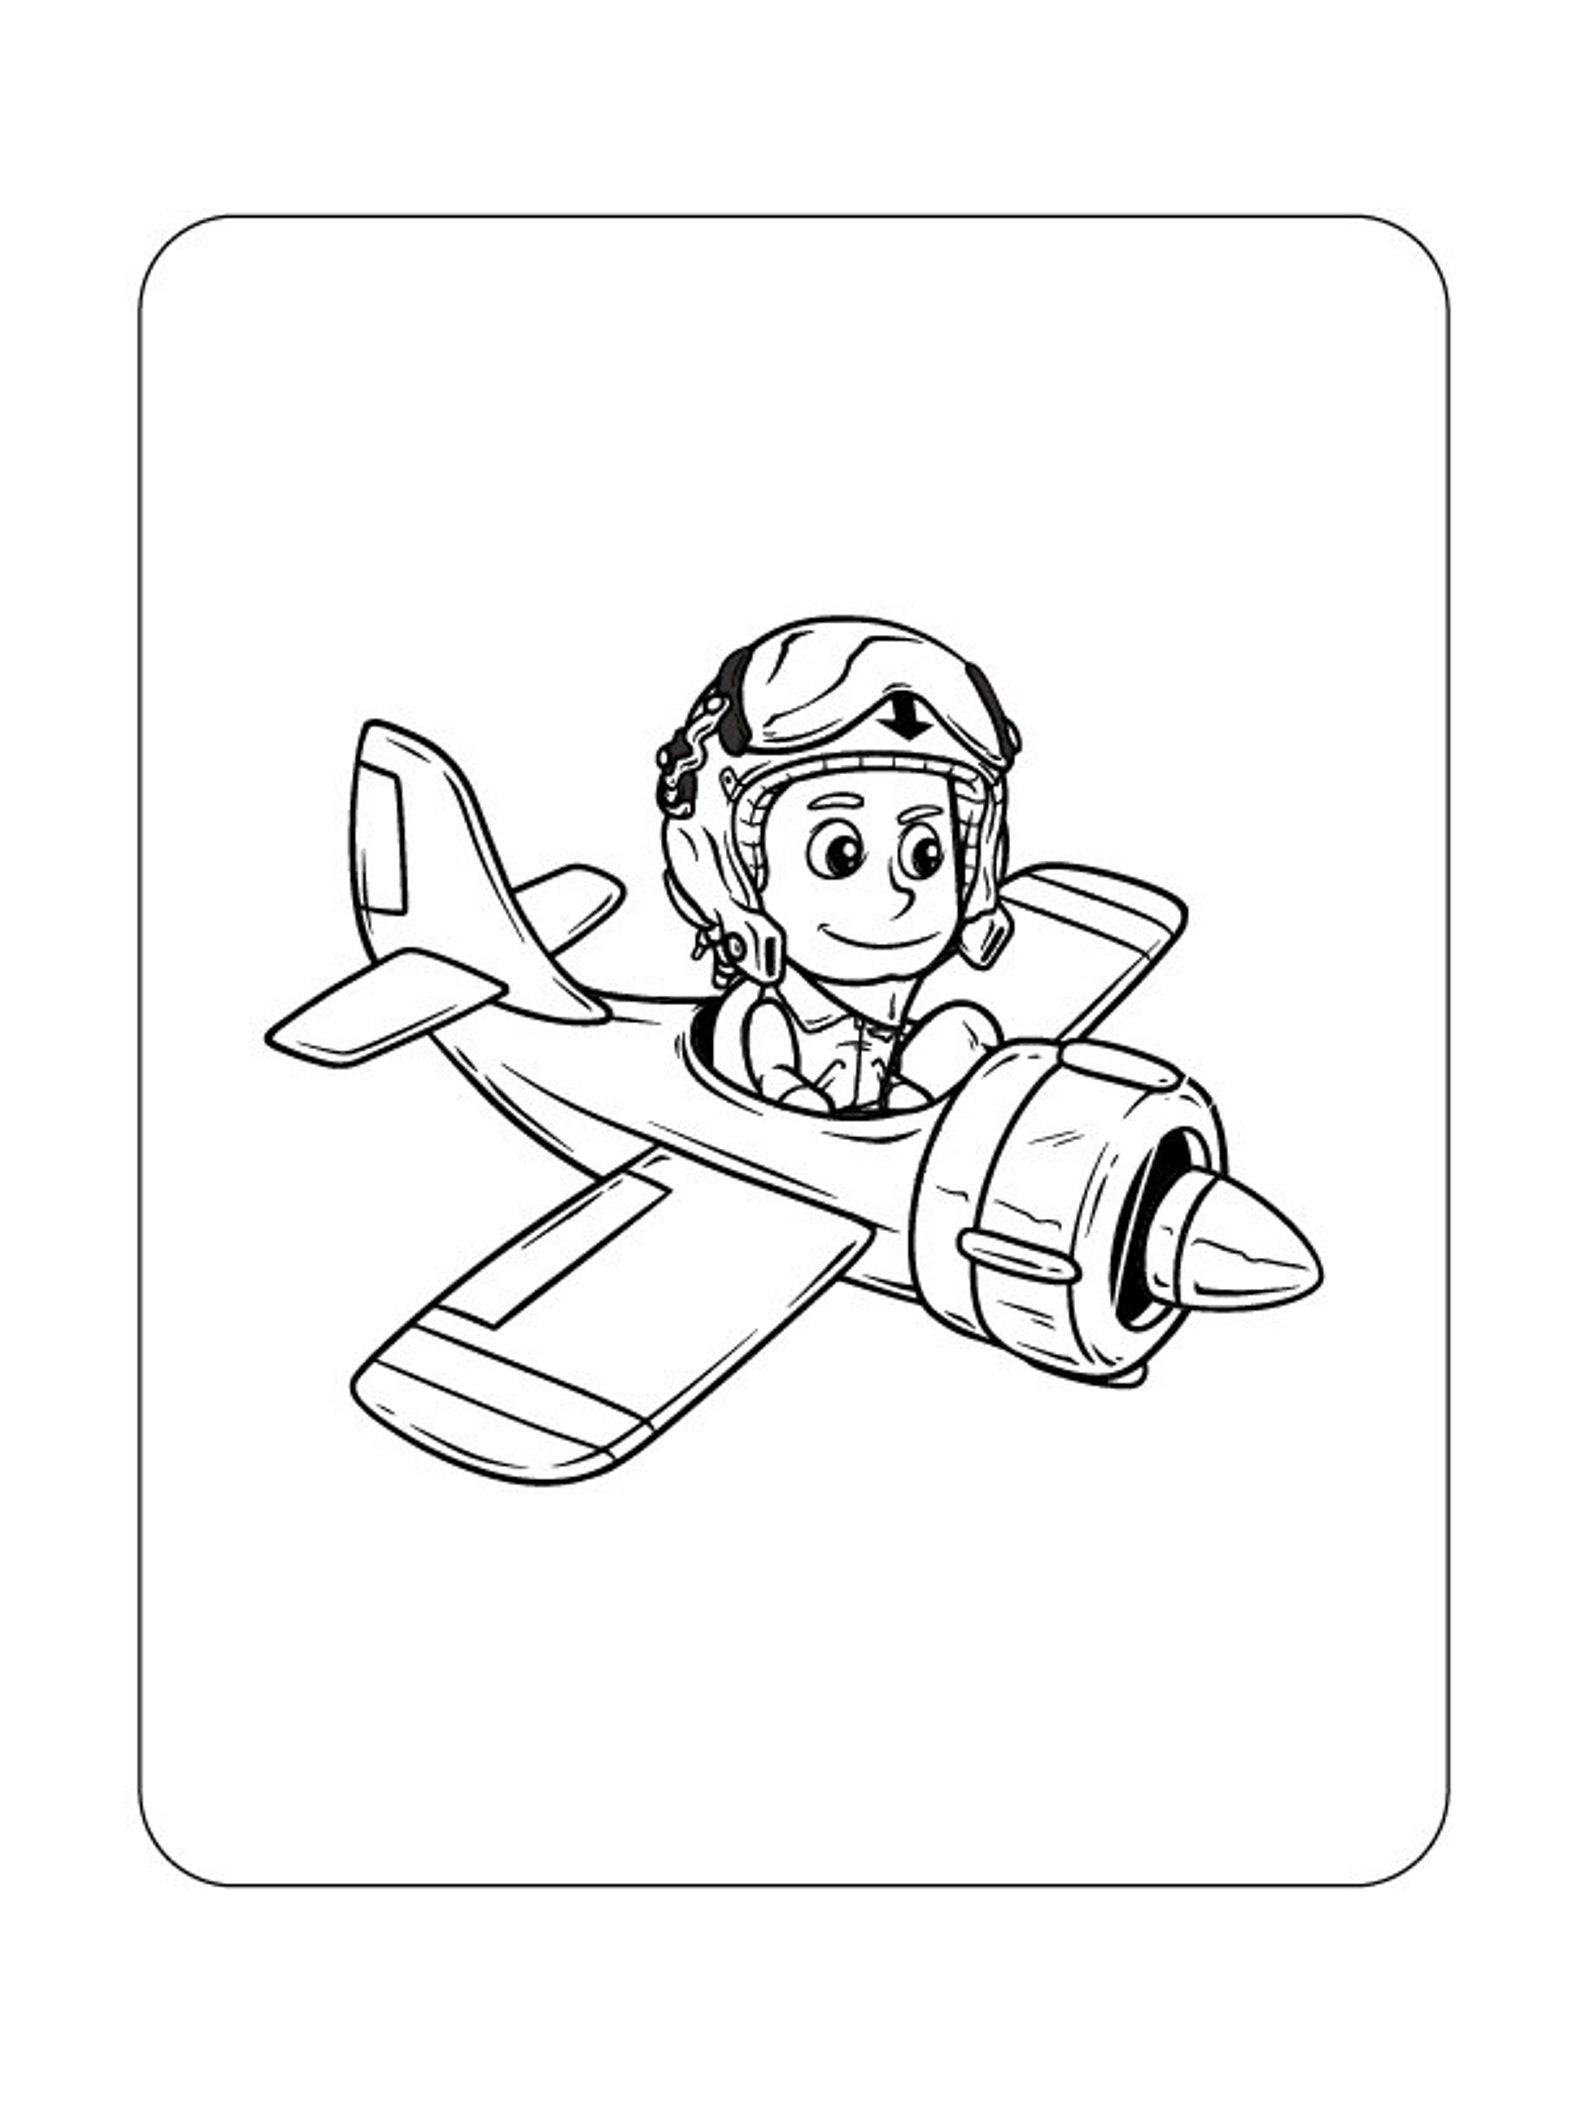 20 Printable Airplane Colouring Pages for Children - Etsy